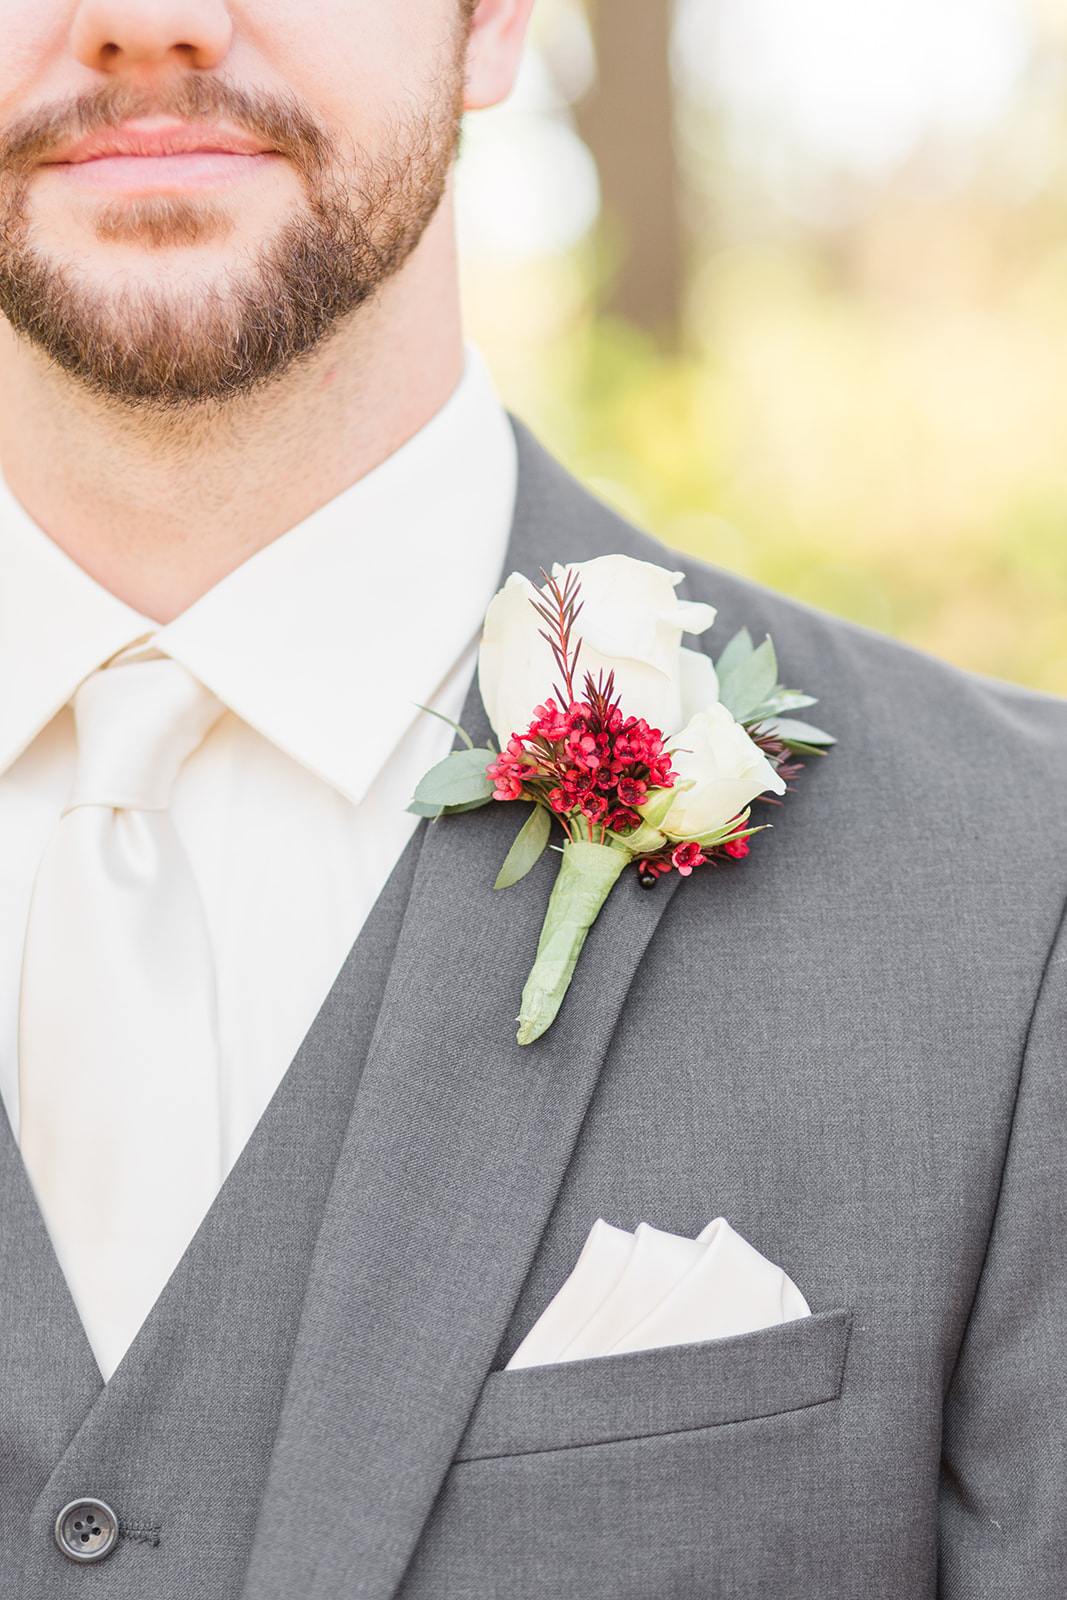 A groom with a white tie and white and red wedding boutonnieres